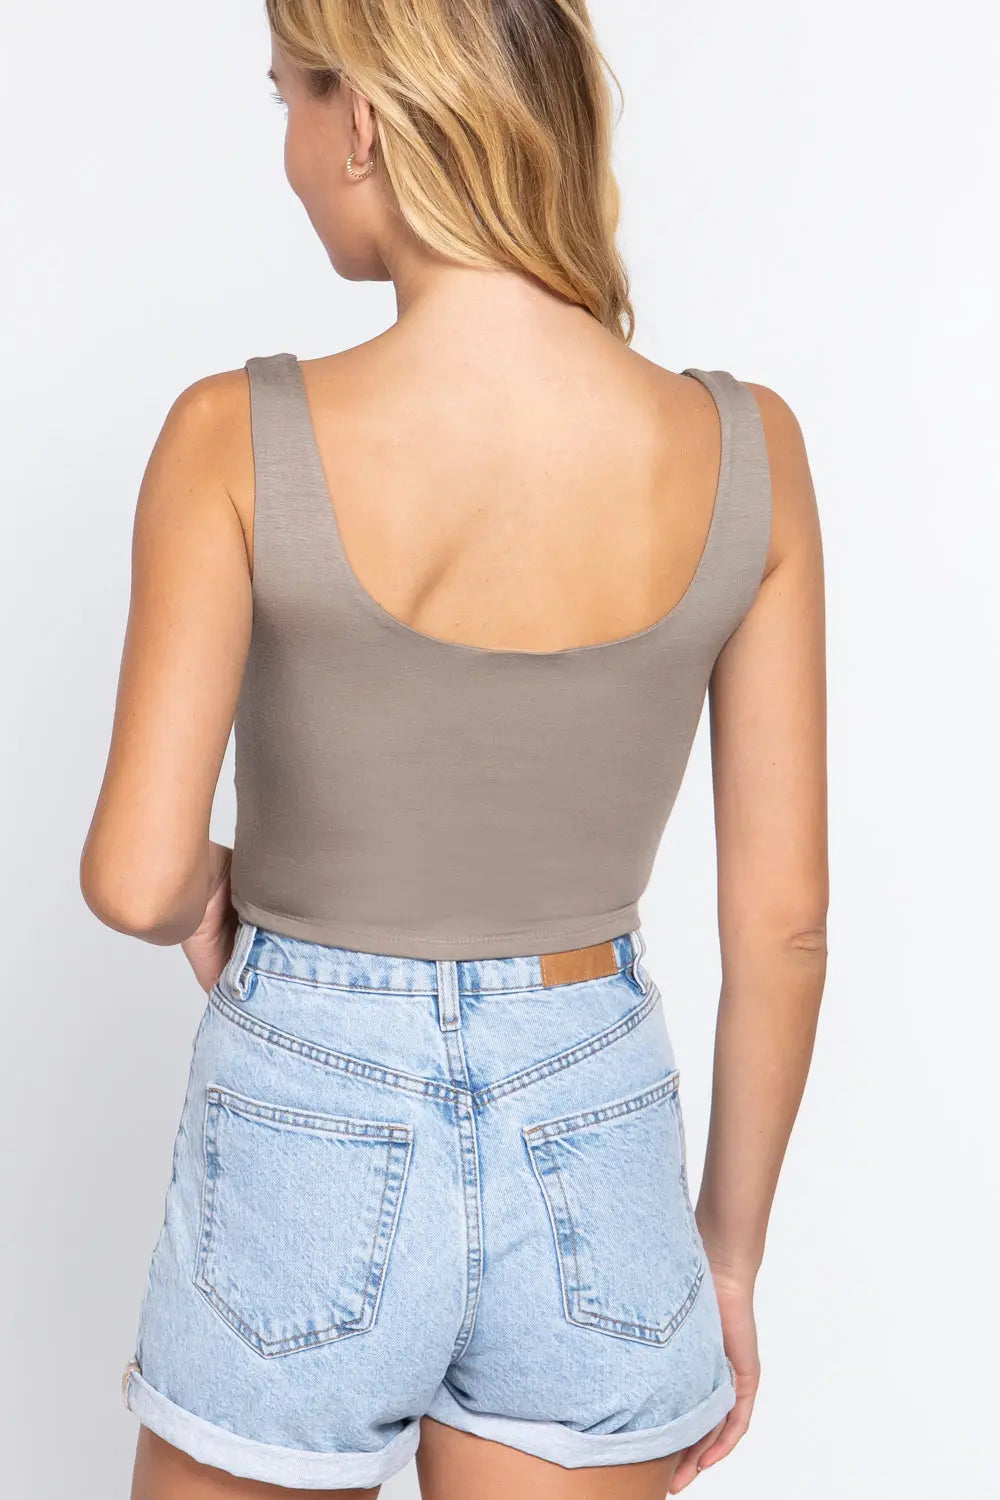 Scoop Neck 2 Ply Crop Tank Top Sunny EvE Fashion